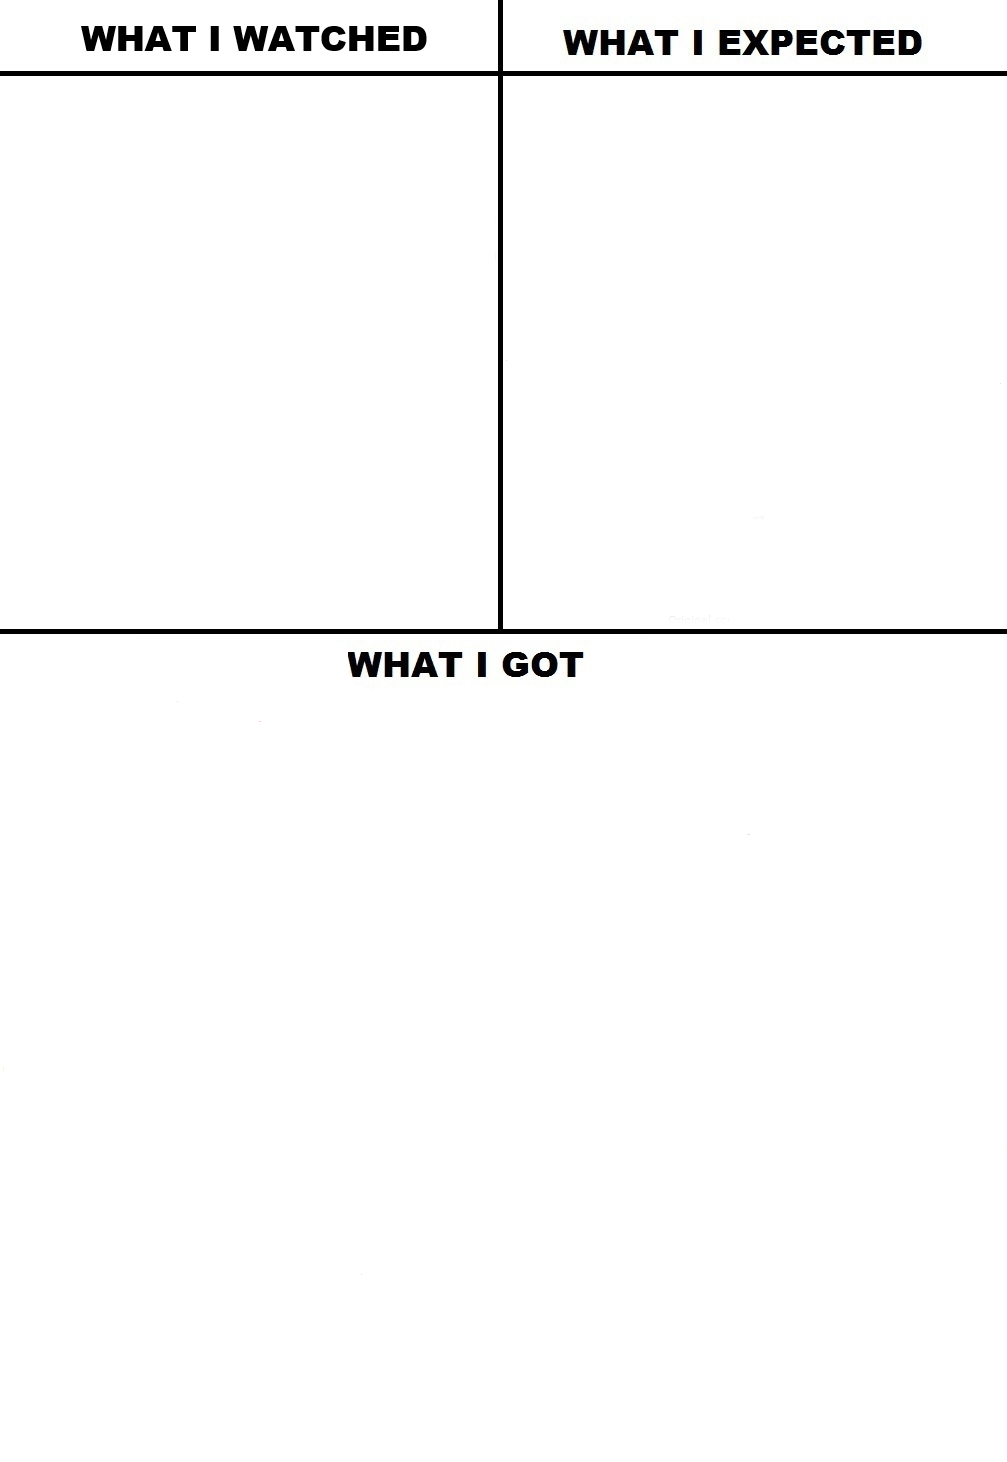 What I watched what I expected and what I got Blank Meme Template